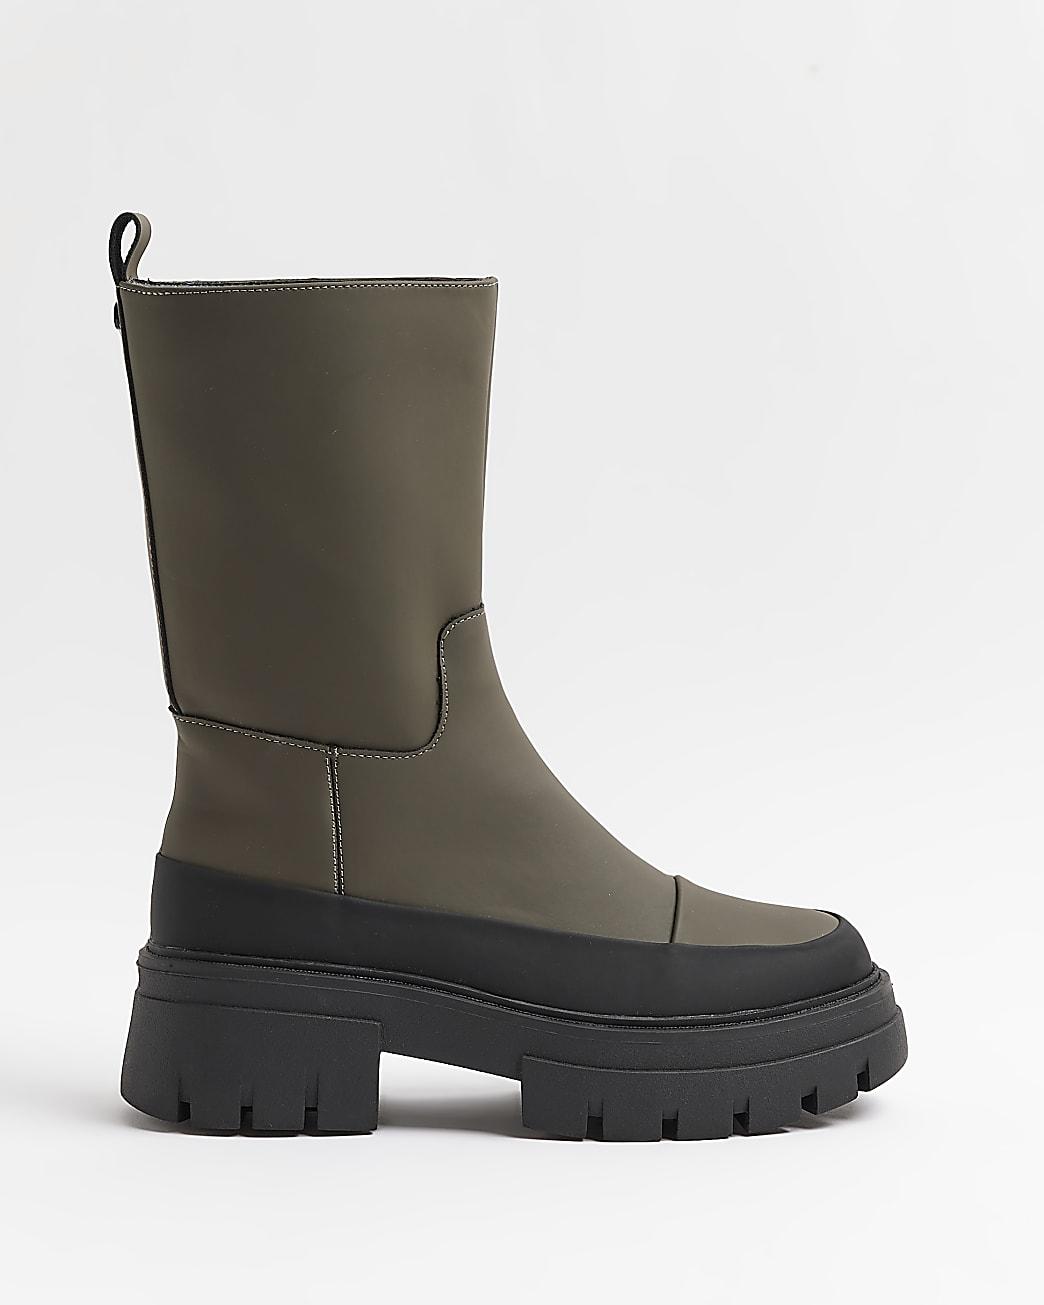 River Island Khaki Chunky Ankle Boots in Black | Lyst